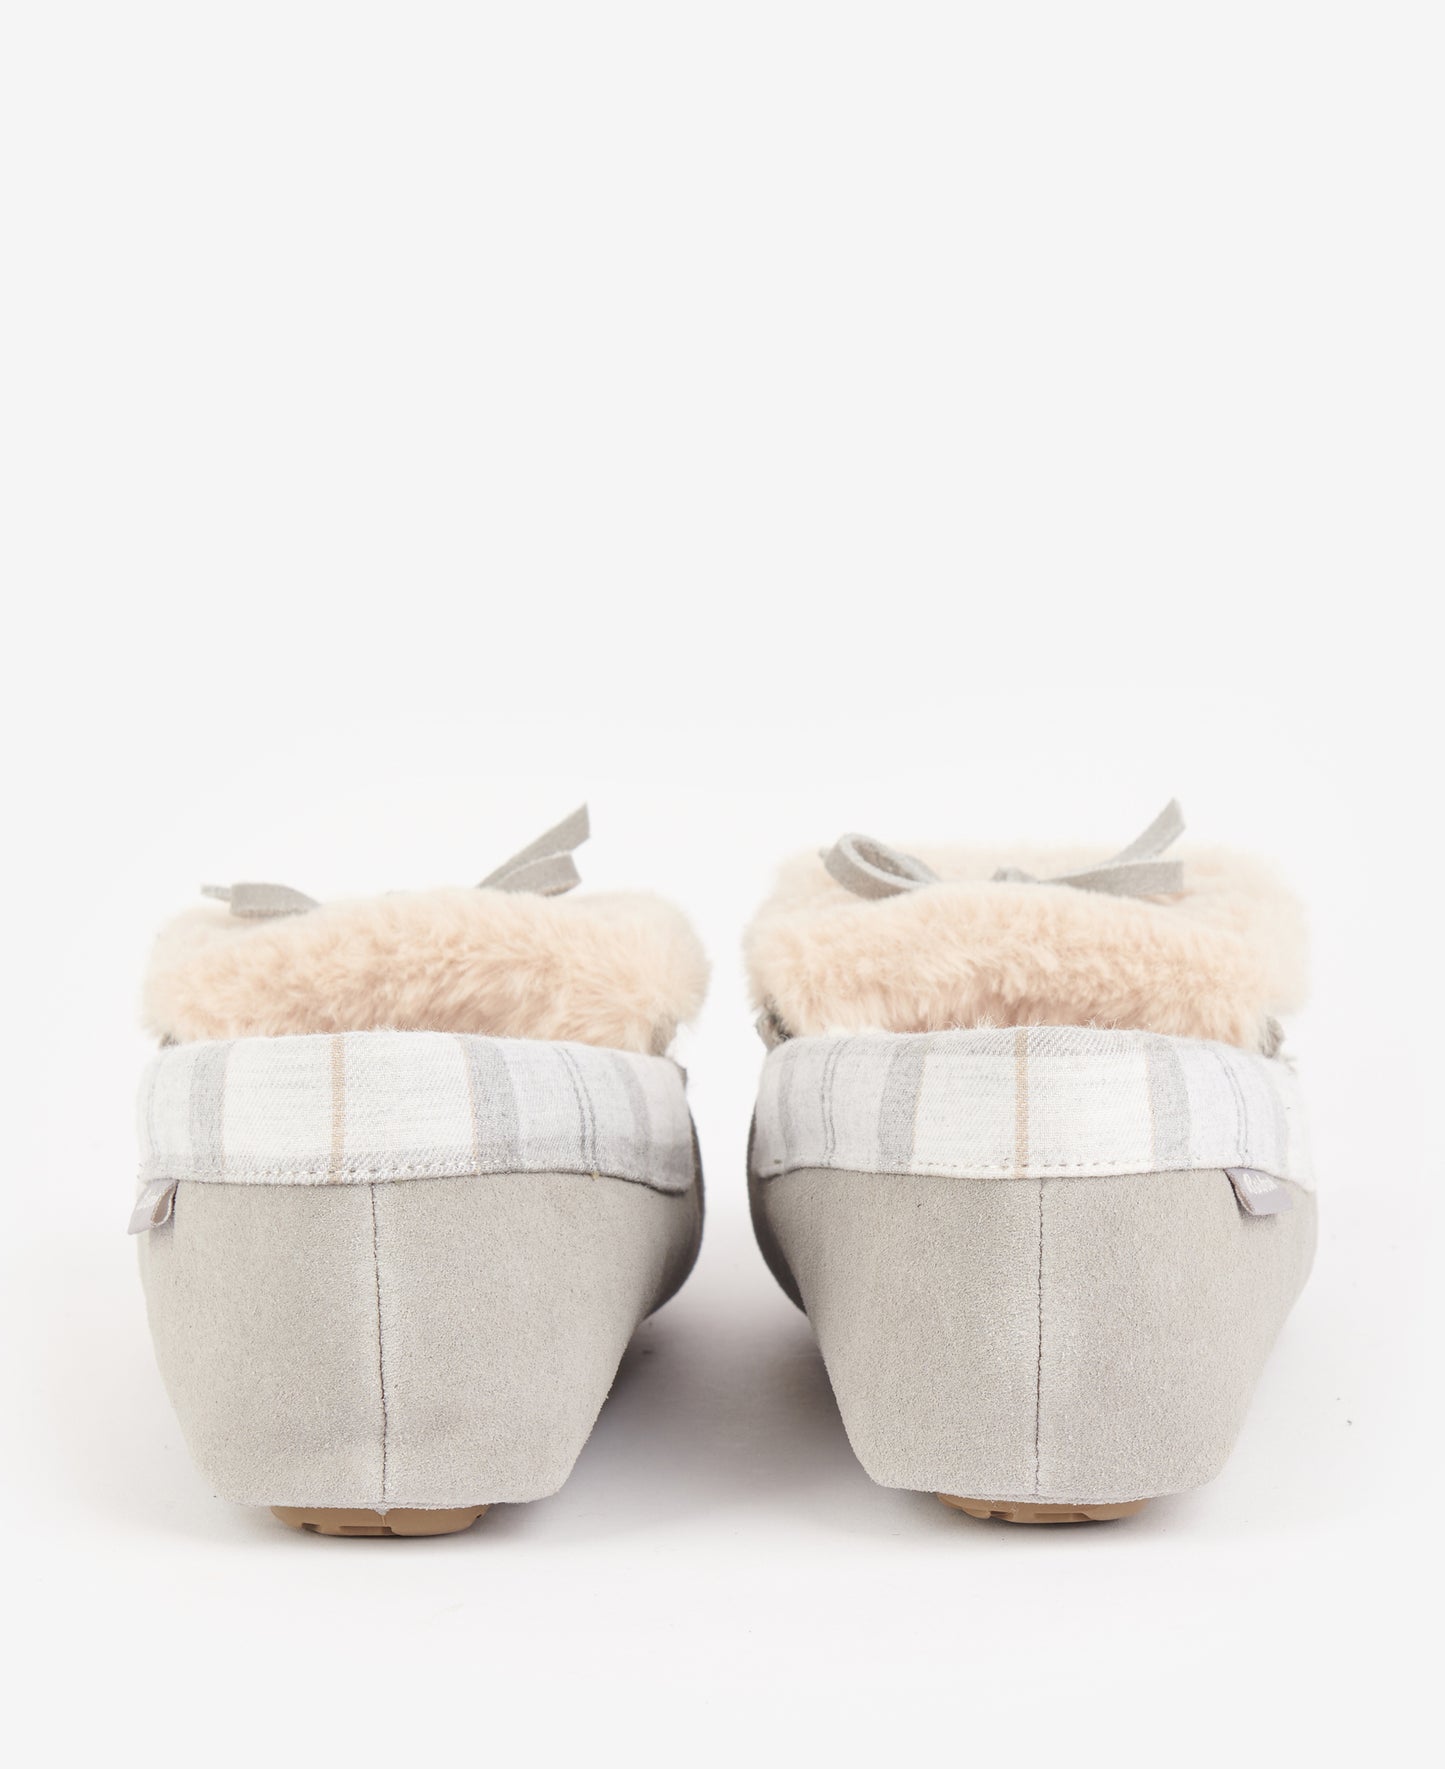 Barbour Darcie Slippers